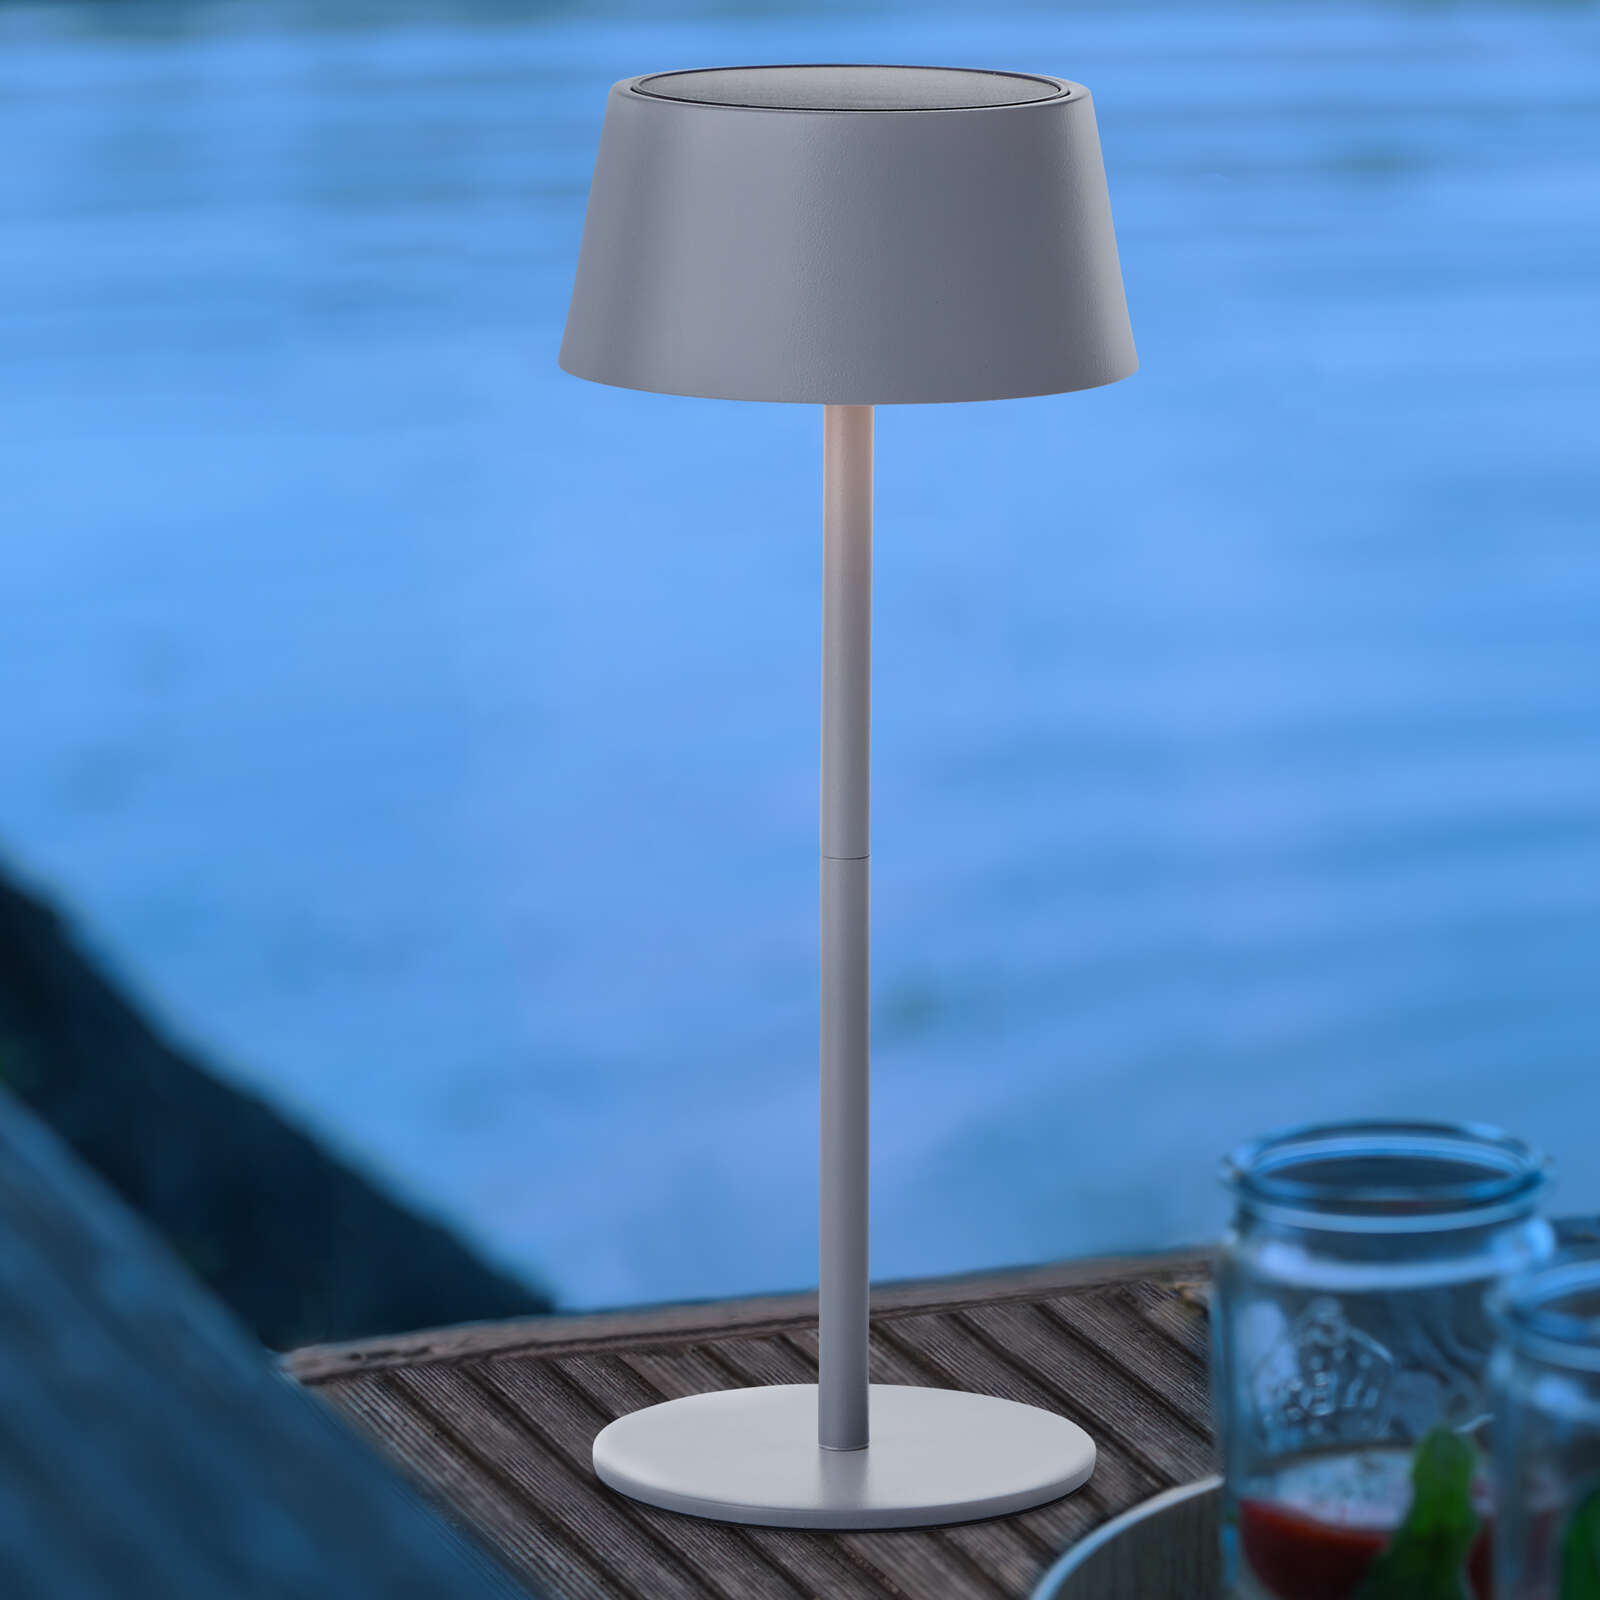             Metal table lamp - Outy 2 - Grey
        